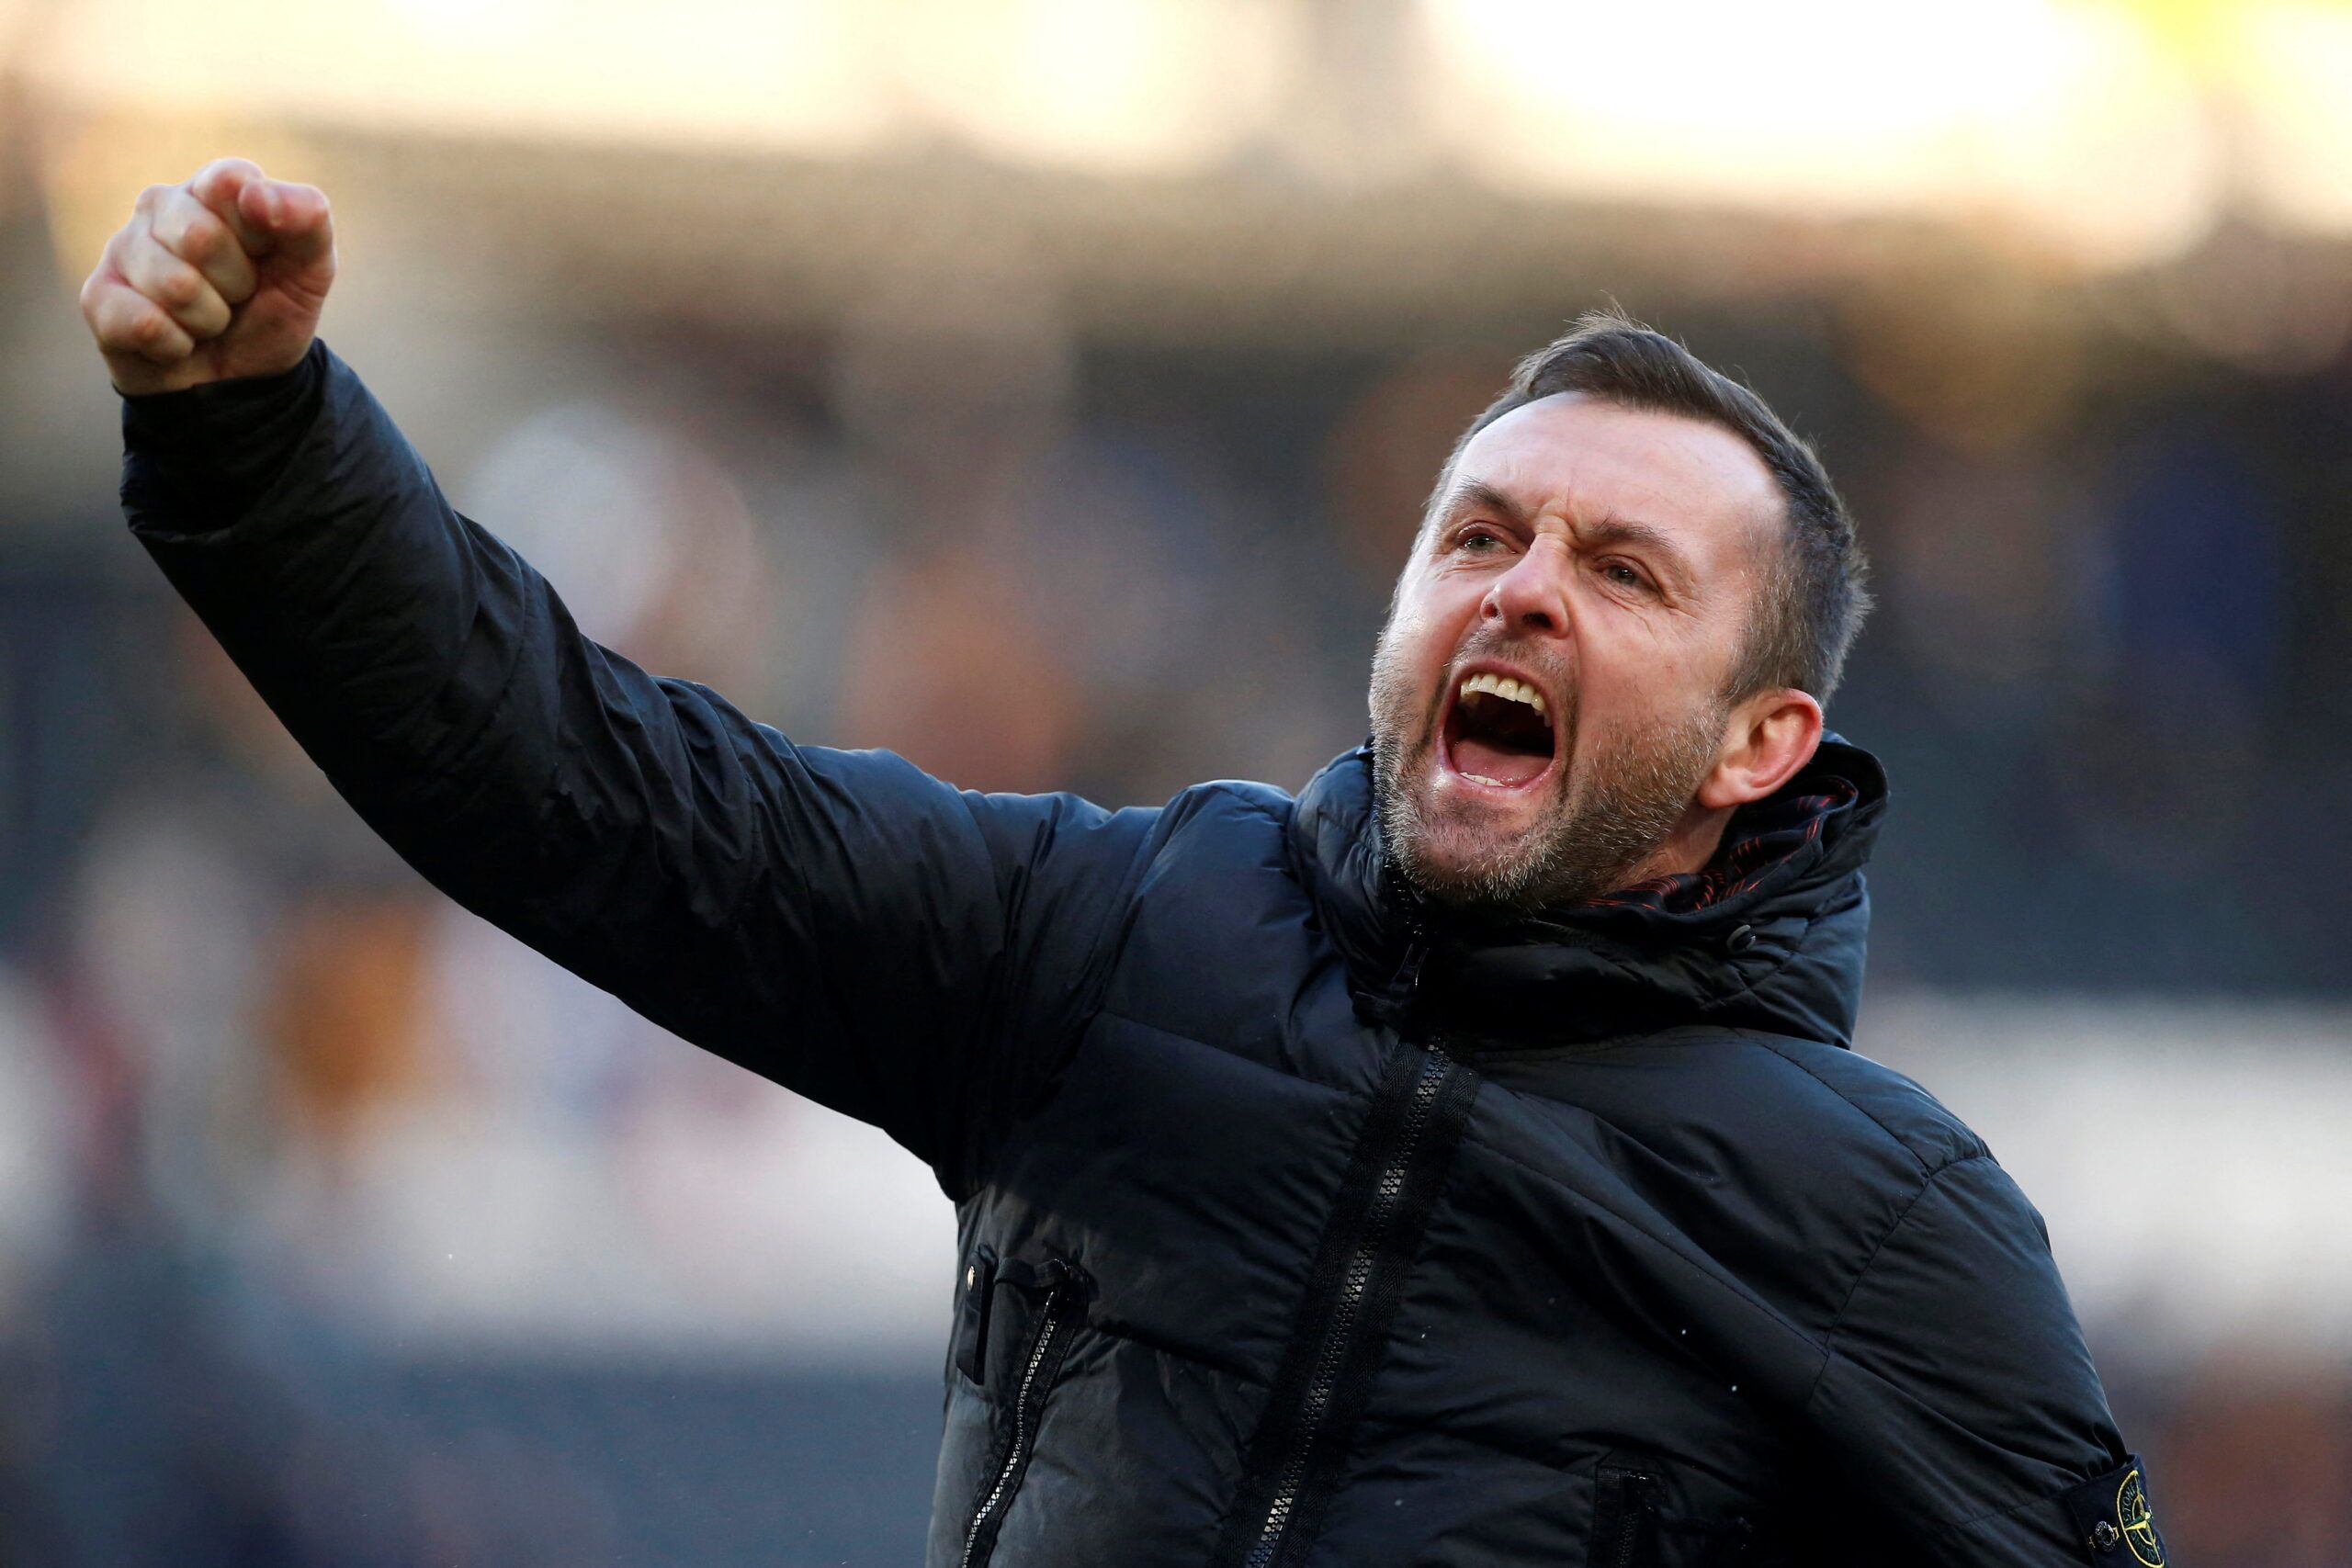 Soccer Football - Championship - Hull City v Luton Town - MKM Stadium, Hull, Britain - March 19, 2022 Luton Town manager Nathan Jones celebrates after the match Action Images/Craig Brough  EDITORIAL USE ONLY. No use with unauthorized audio, video, data, fixture lists, club/league logos or 